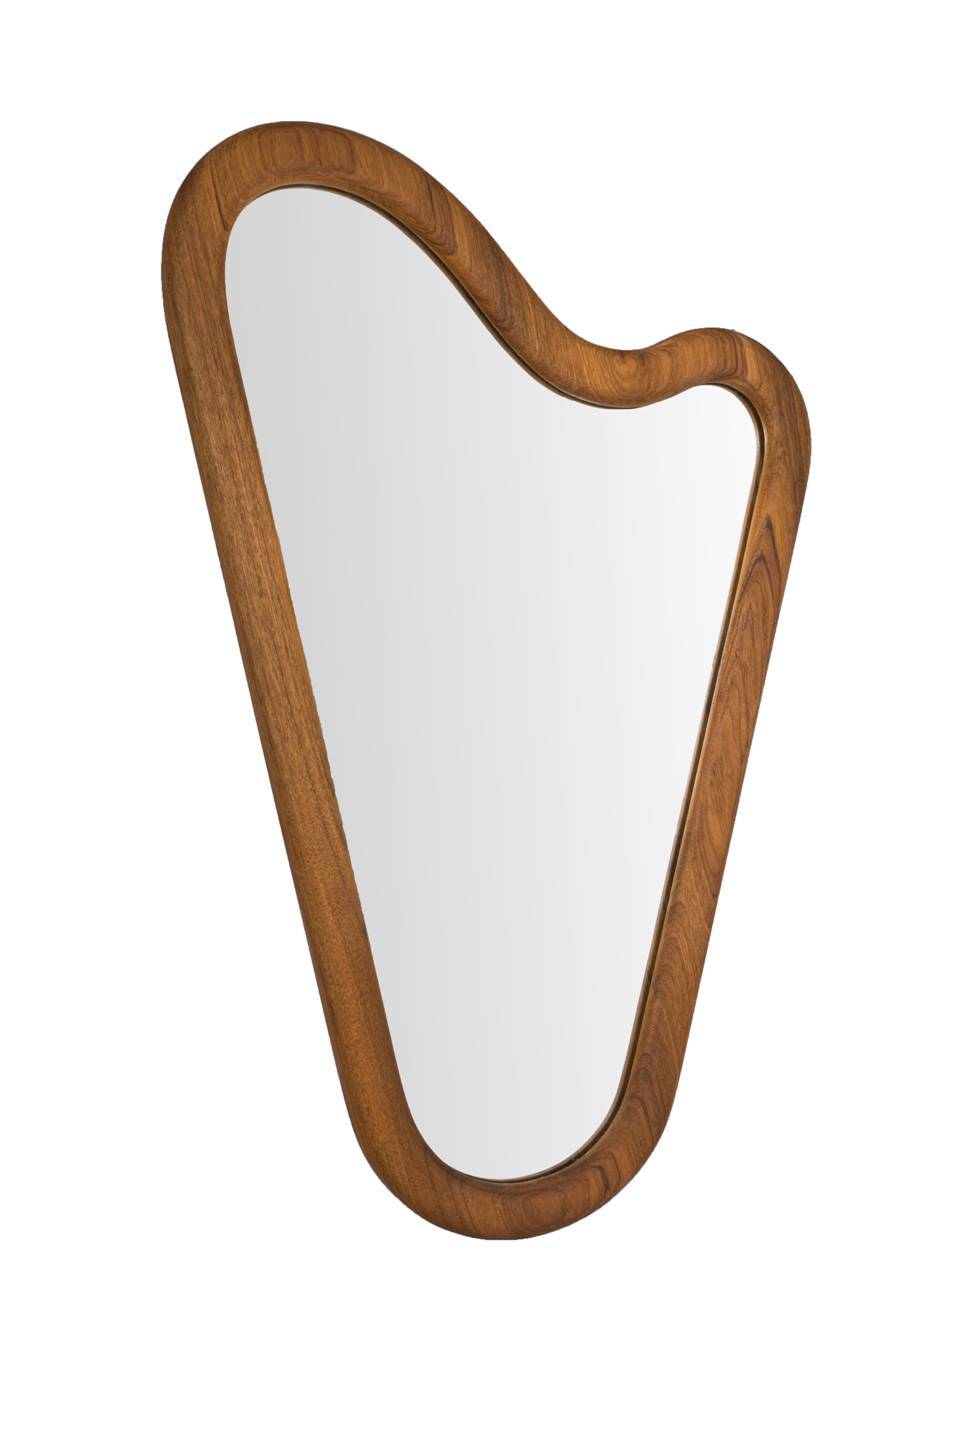 This delicate harp-shaped vanity or bathroom mirror is framed in a solid piece of American Walnut, hand-sanded and stained. 

The Teague Mirror can be made to custom sizes. Hand crafted in our Los Angeles workshop.